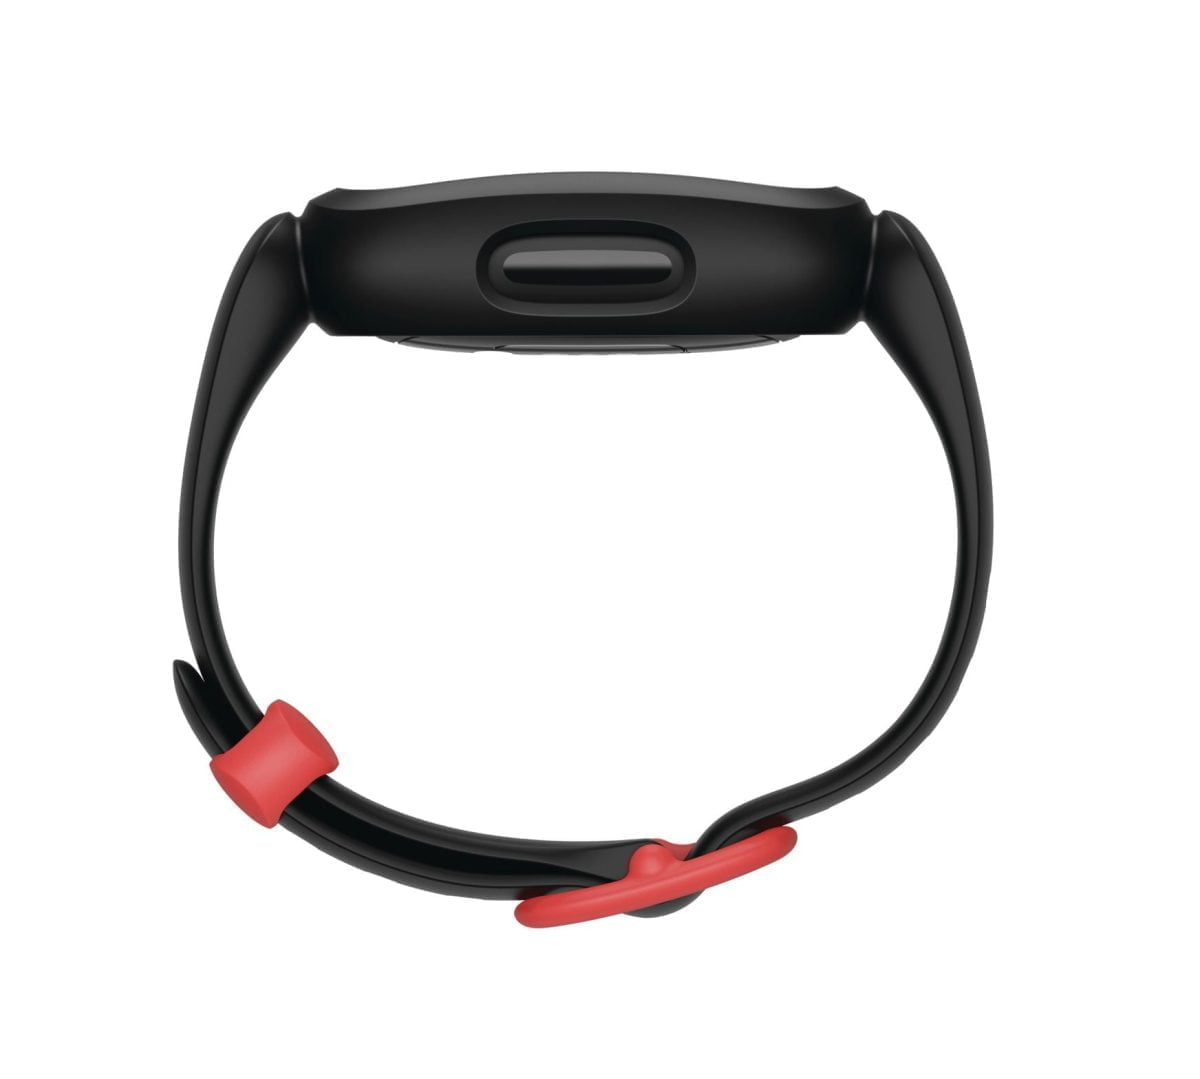 6453259Cv1D Fitbit &Lt;H1&Gt;Fitbit - Ace 3 Activity Tracker For Kids - Black/ Sport Red&Lt;/H1&Gt; Https://Www.youtube.com/Watch?V=Rtnv4Kzcz5E Get Kids Moving And Make Fitness Fun With Fitbit Ace 3. With Activity And Sleep Tracking, Fun Challenges And Up To 8 Days Of Battery, Ace 3 Motivates Kids, Friends And Family To Build Healthy Habits Together. Fitbit Ace 3 Fitbit Ace 3 Activity Tracker For Kids - Black/ Sport Red